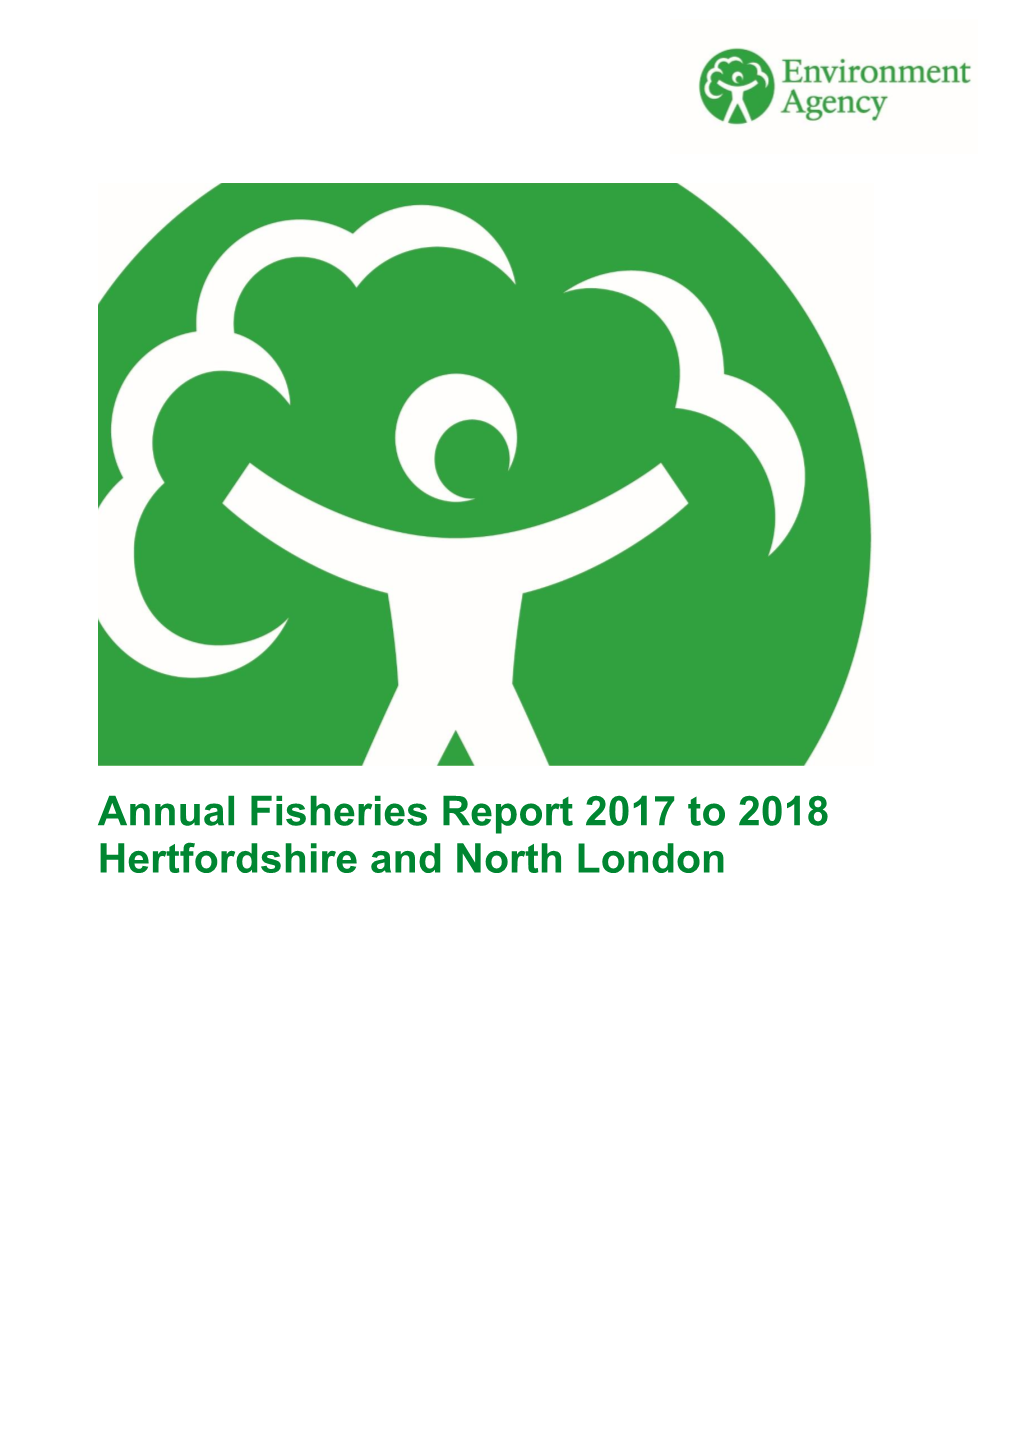 Annual Fisheries Report 2017 to 2018 Hertfordshire and North London